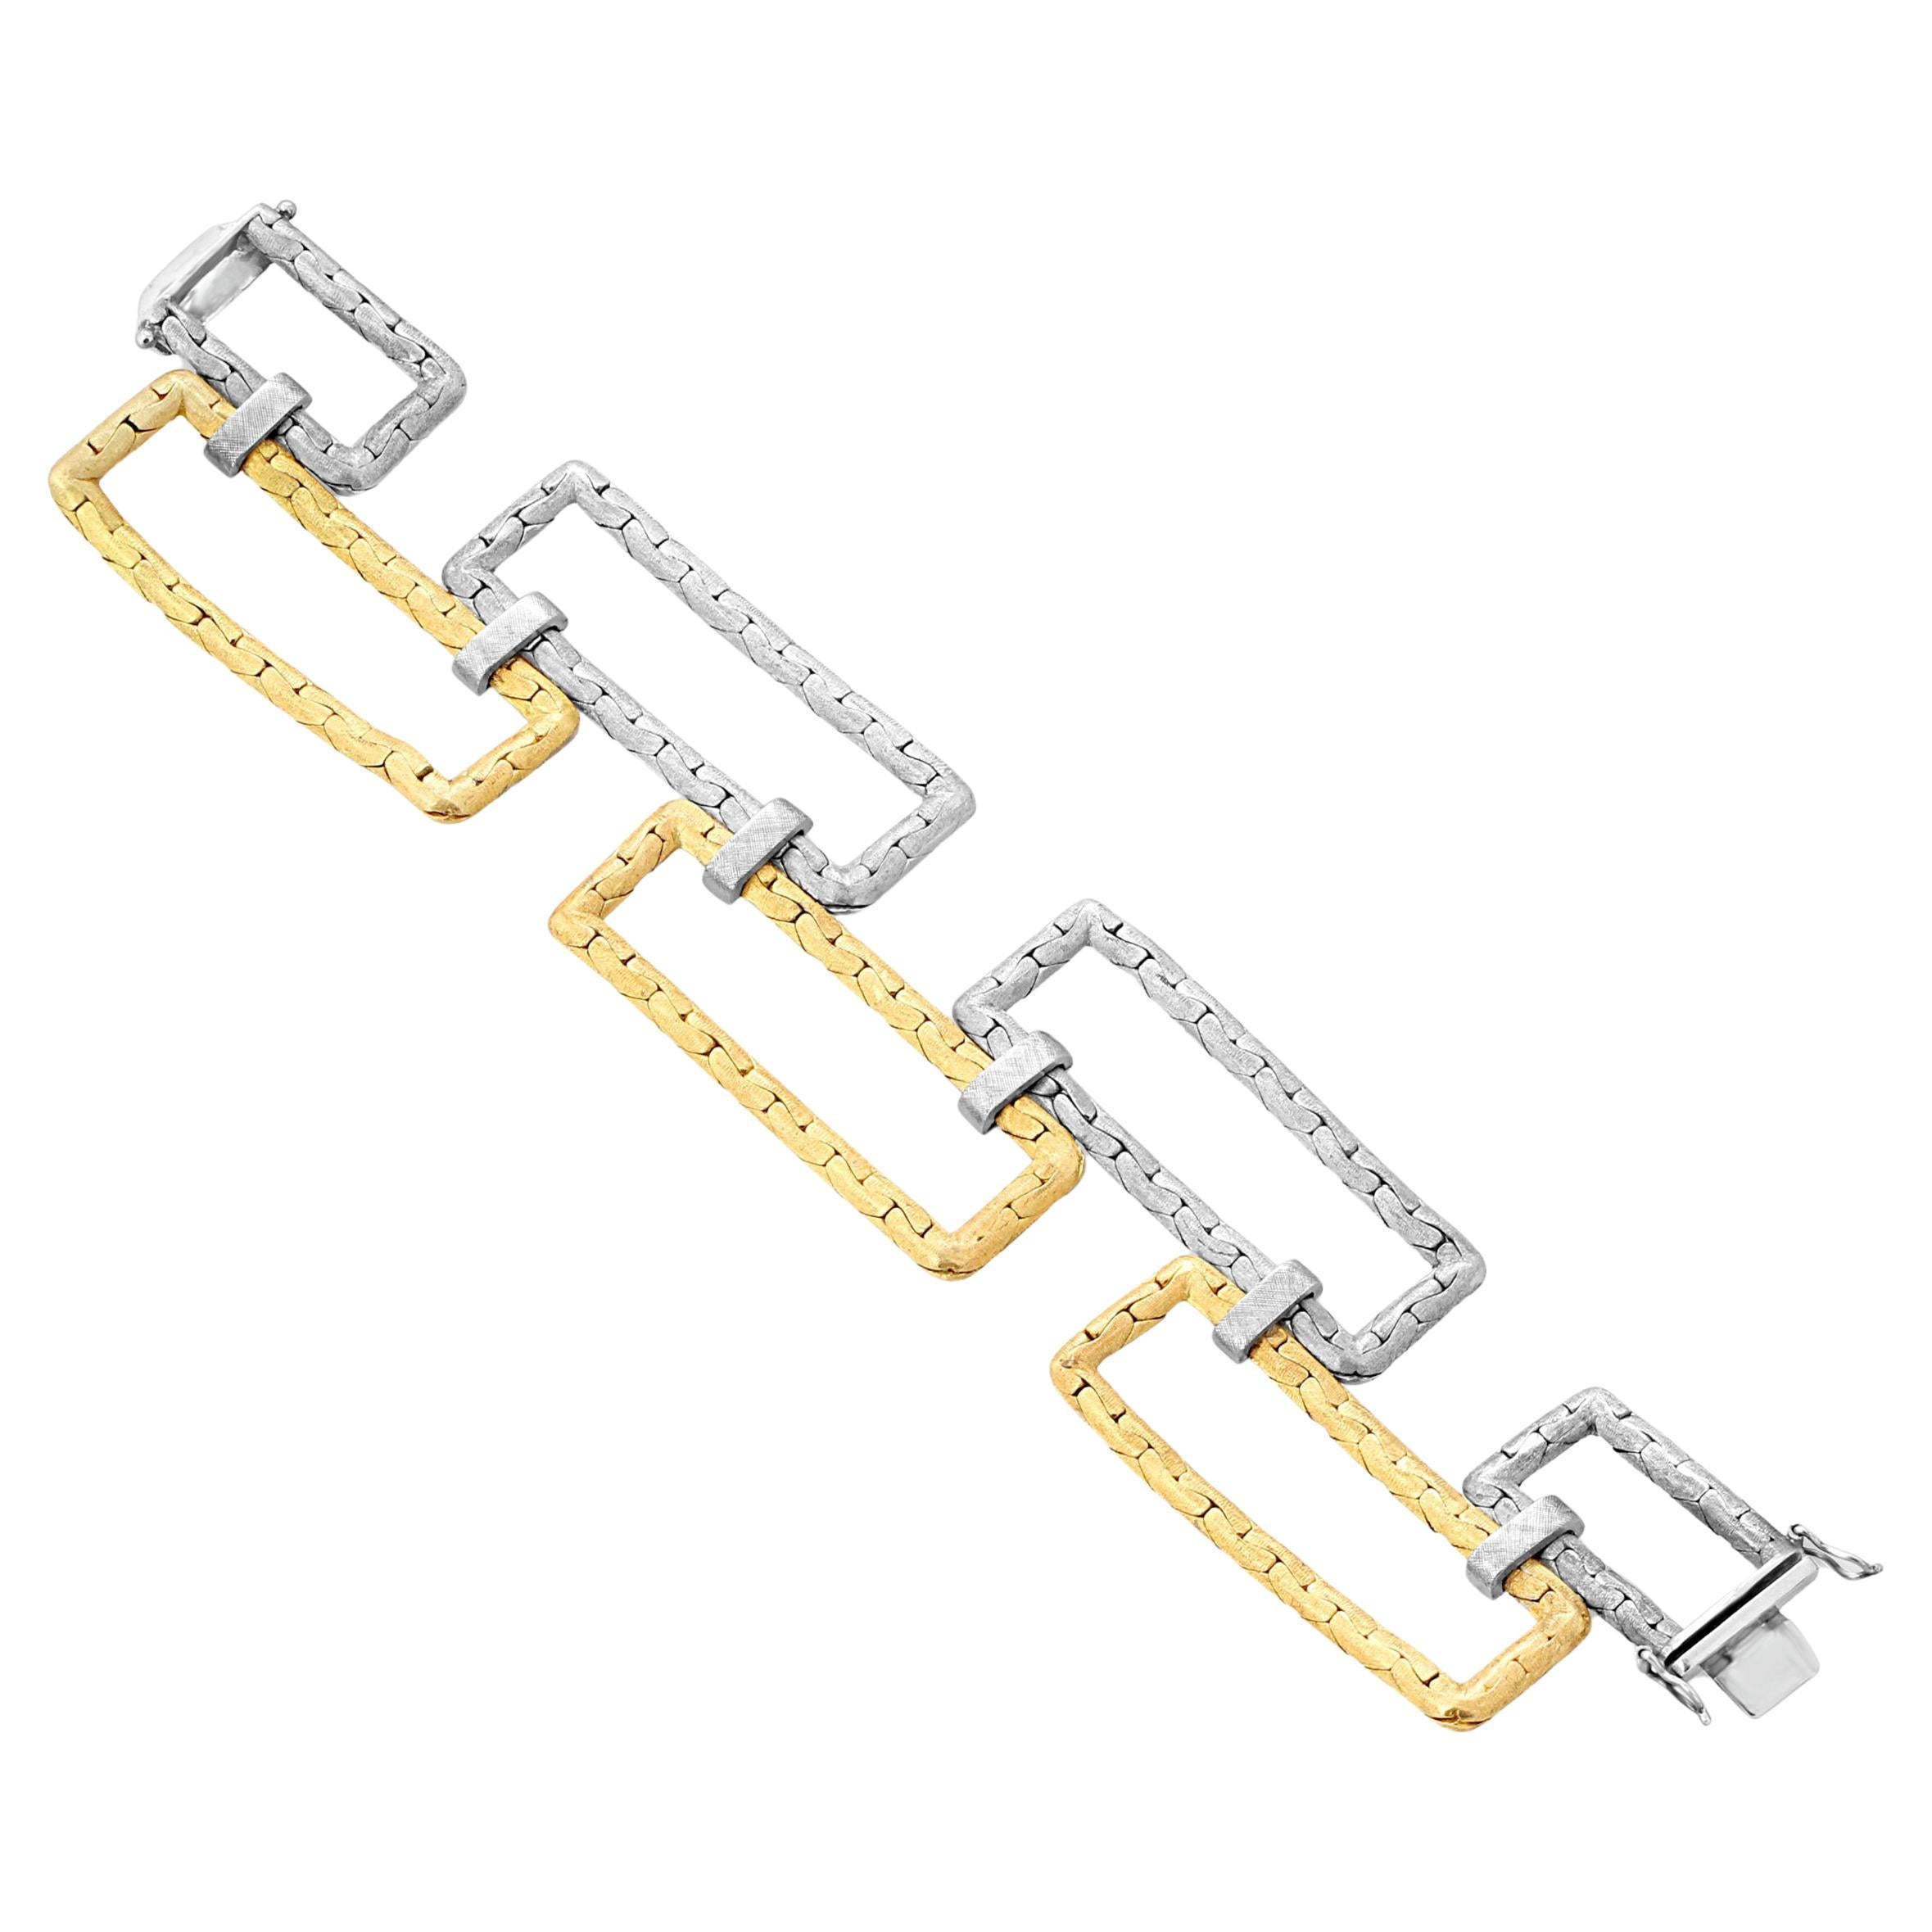 An elongated rectangular bracelet by Villa crafted from open links of textured white and yellow gold. Weight = 72.78gr. Circa 1970s.